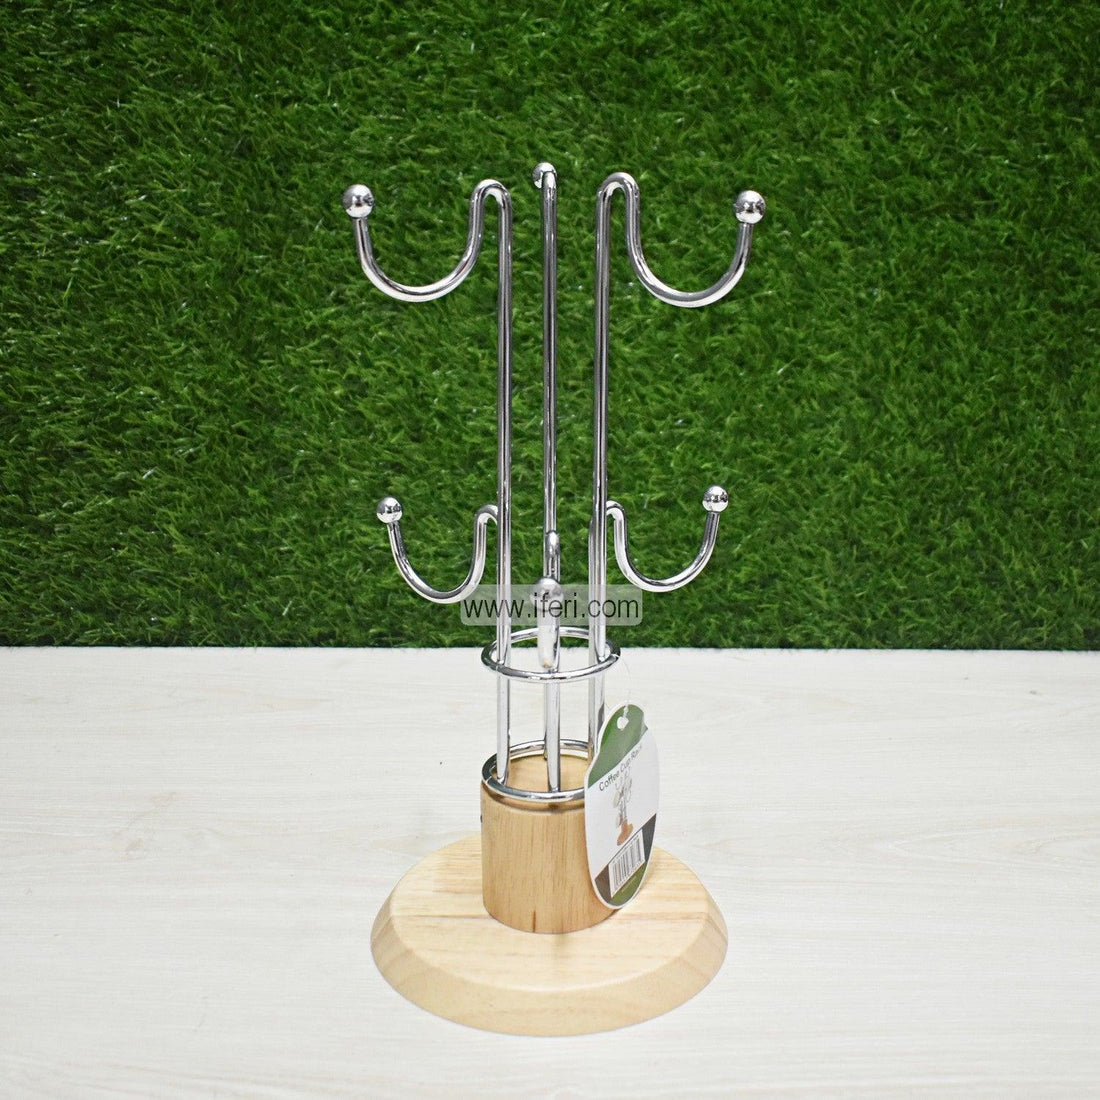 13.5 inch Metal Cup Stand with Wooden Base TG2399 Price in Bangladesh - iferi.com